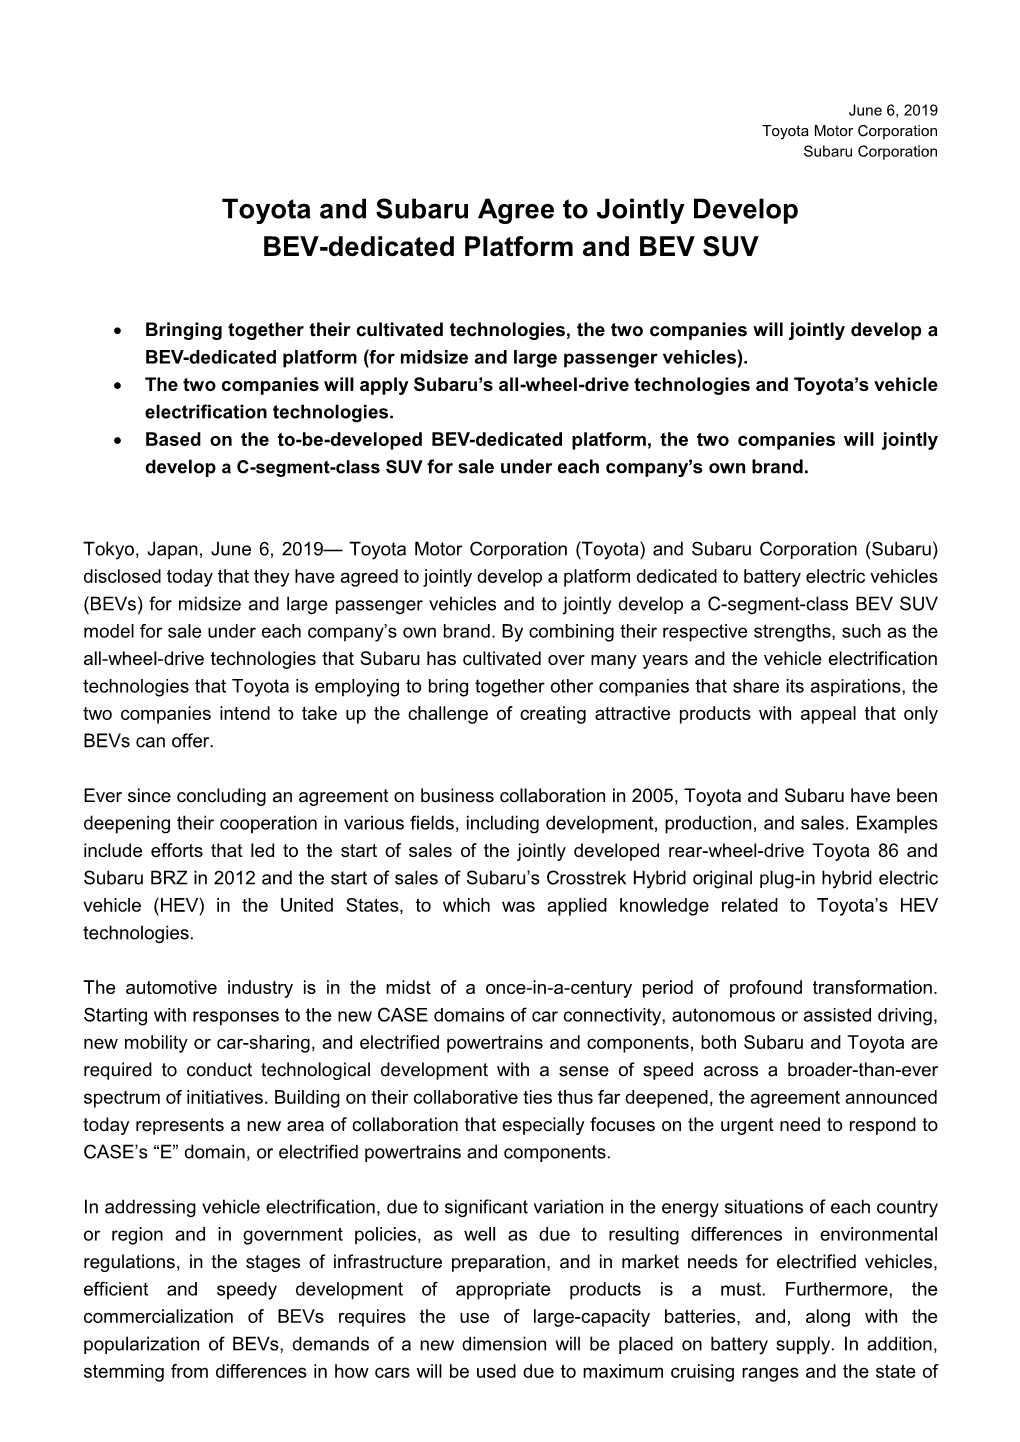 Toyota and Subaru Agree to Jointly Develop BEV-Dedicated Platform and BEV SUV